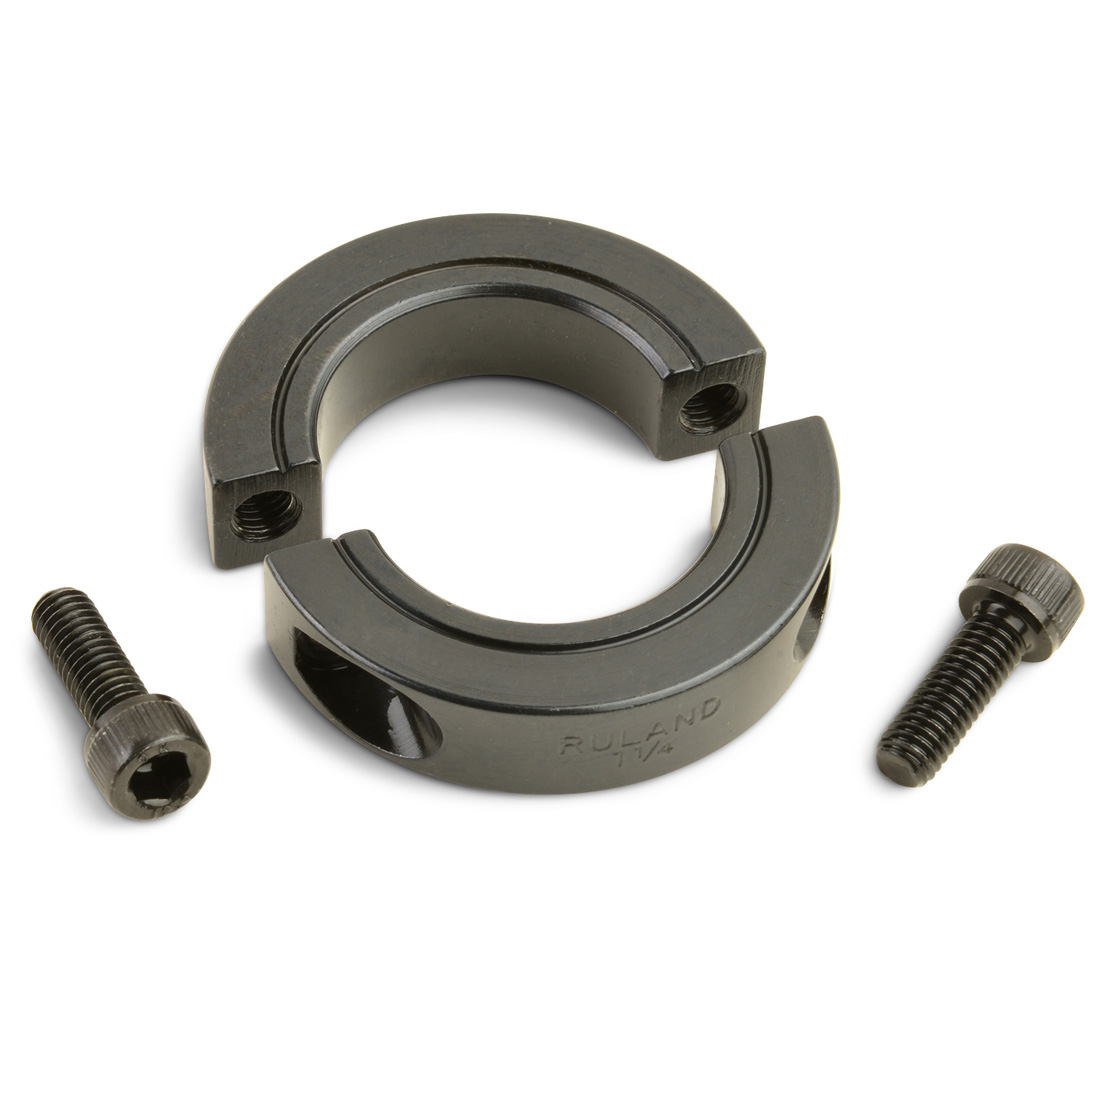 1215 Lead-Free Steel Black Oxide Side 1: 30 mm MCLC Series Ruland Manufacturing Co Inc MCLC-30-30-F Bore Bore Side 2: 30 mm Clamp-On Rigid Coupling 